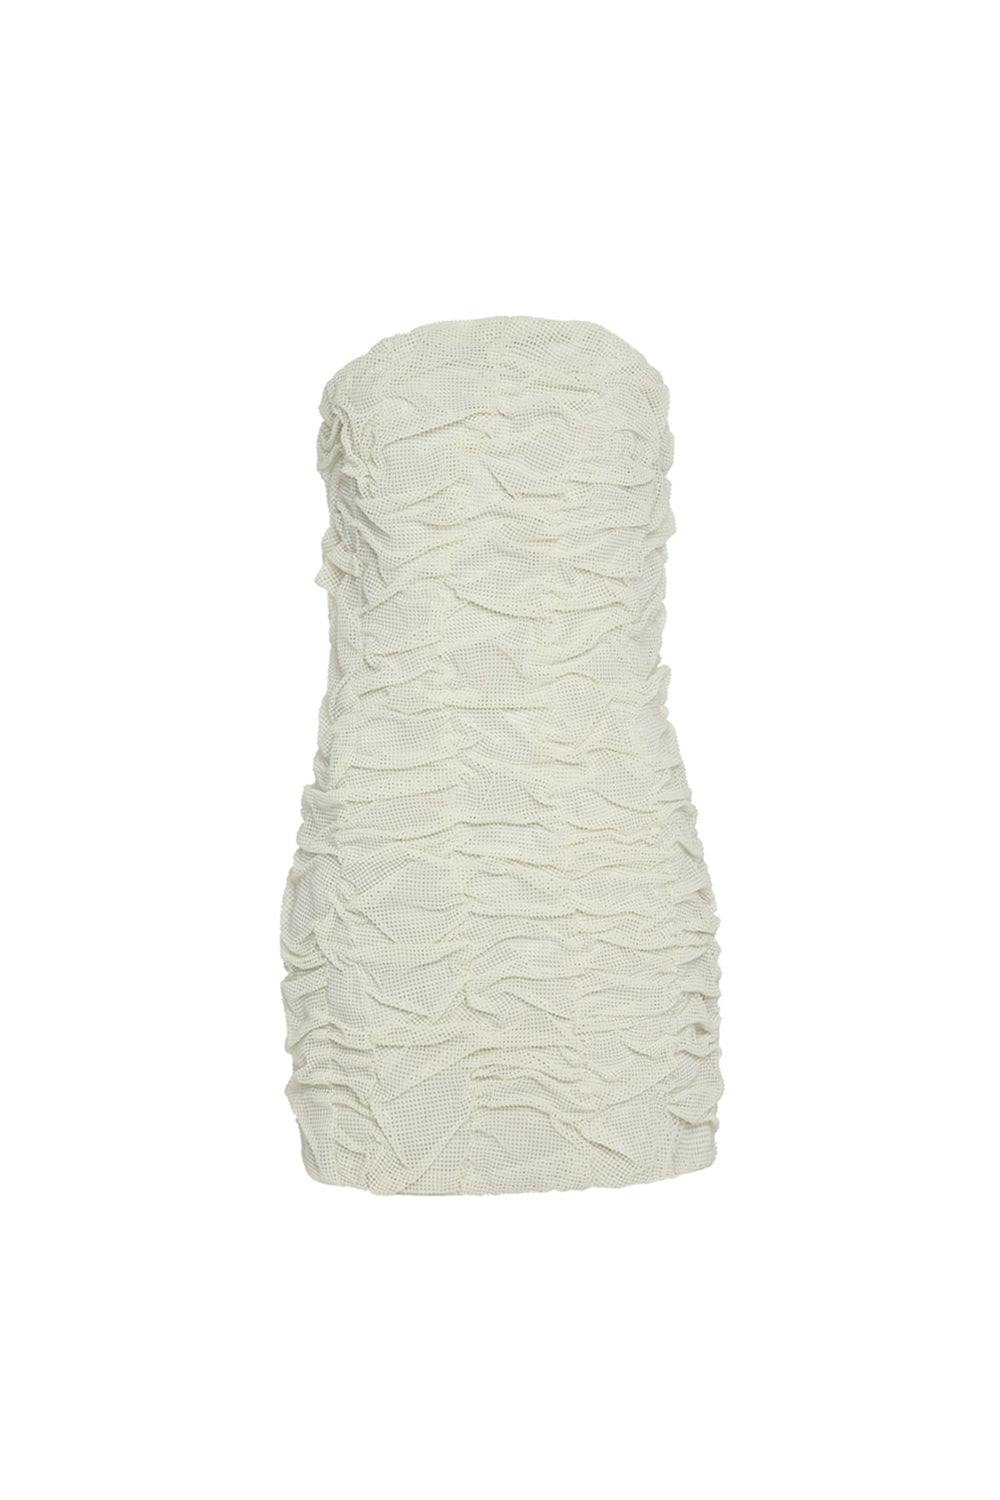 Thumbnail preview #2 for Hand Ruched Ivory Pearl Dress